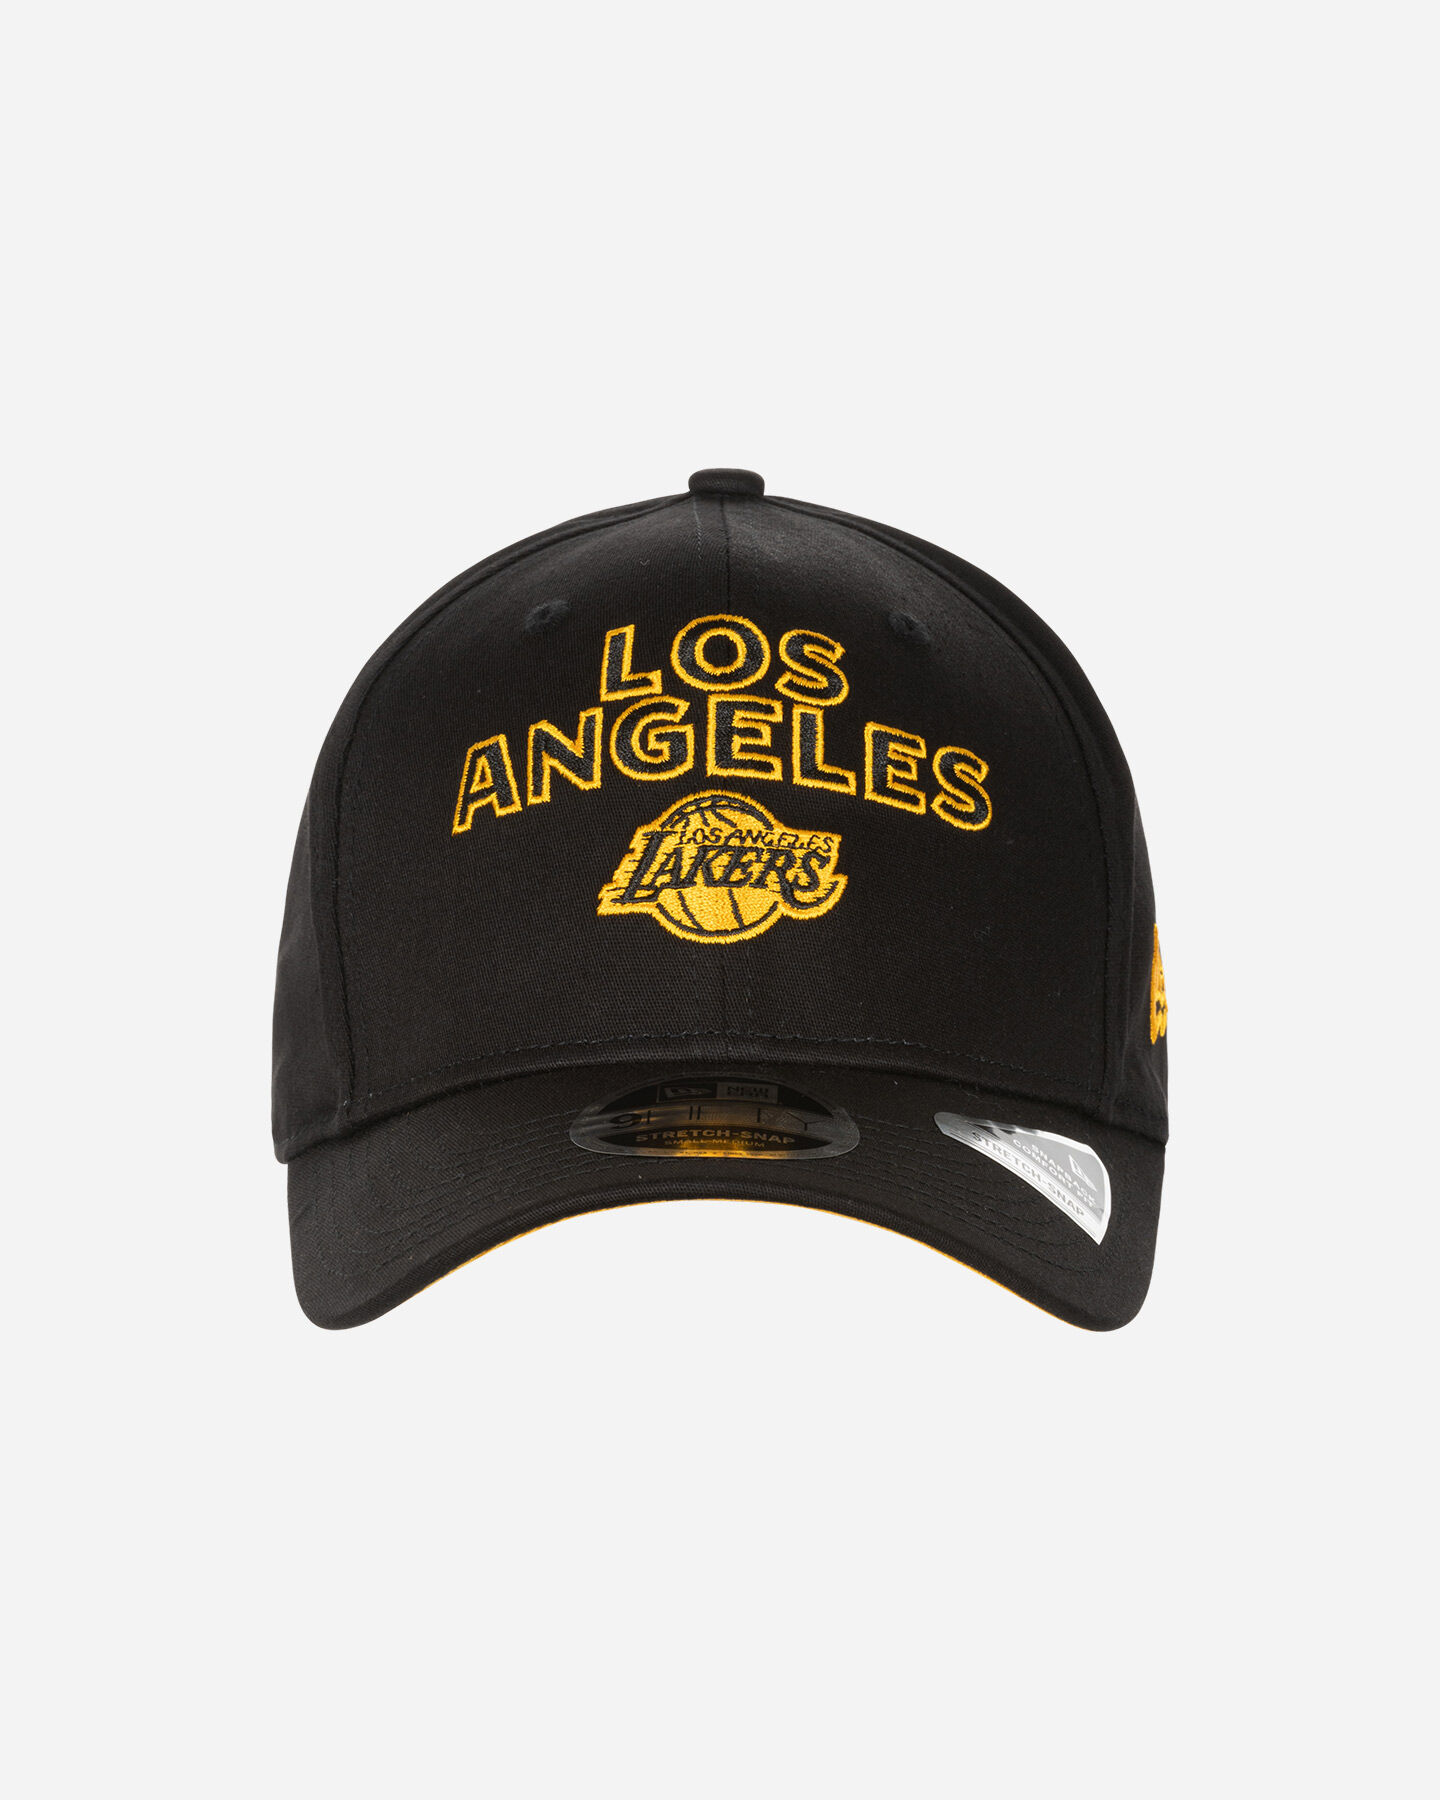  Cappellino NEW ERA 9FIFTY LOS ANGELES LAKERS M S4131741|001|SM scatto 0